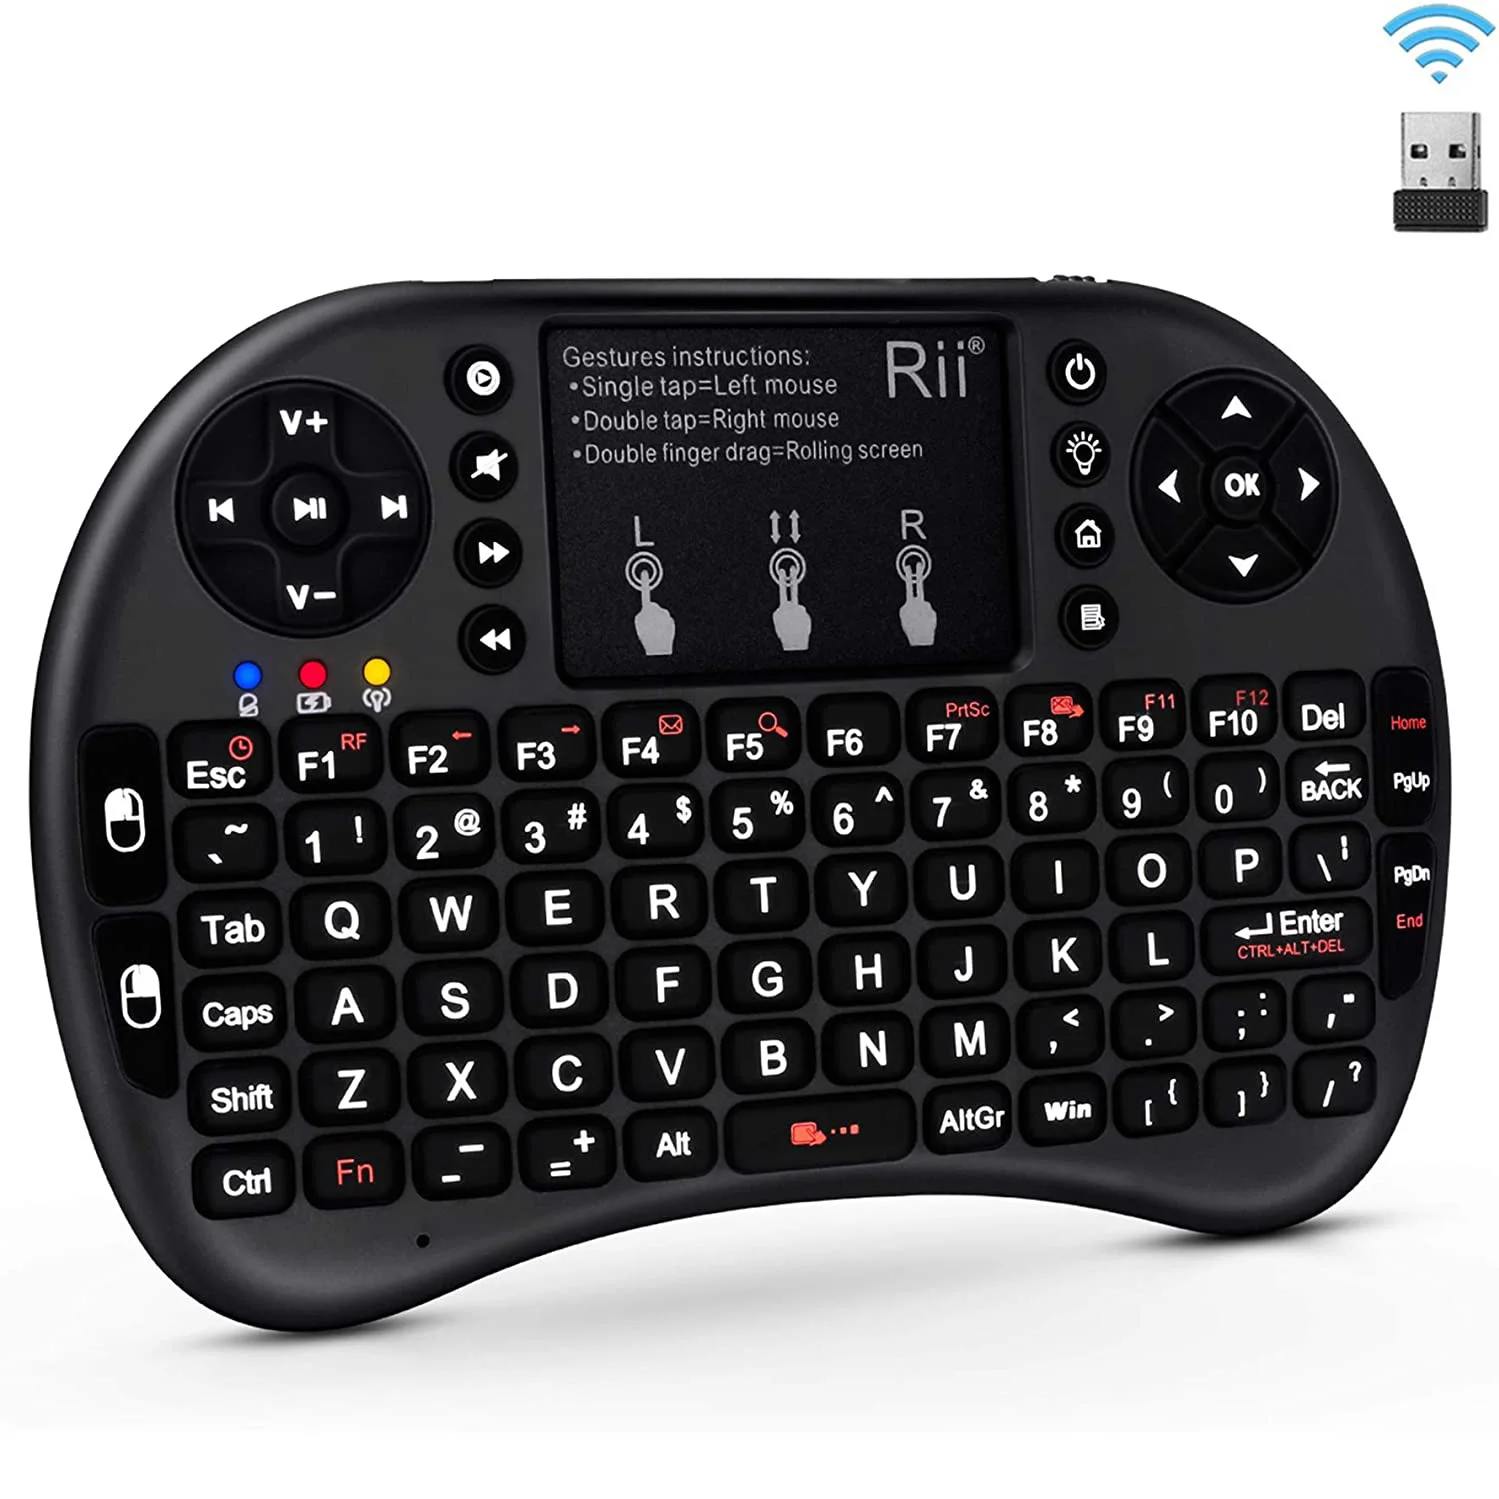 

Rii i8+ Mini Wireless Backlight FR/HE/AR/US/RU Keyboard With Touchpad Air Mouse Remote Control For Windows Android TV Box